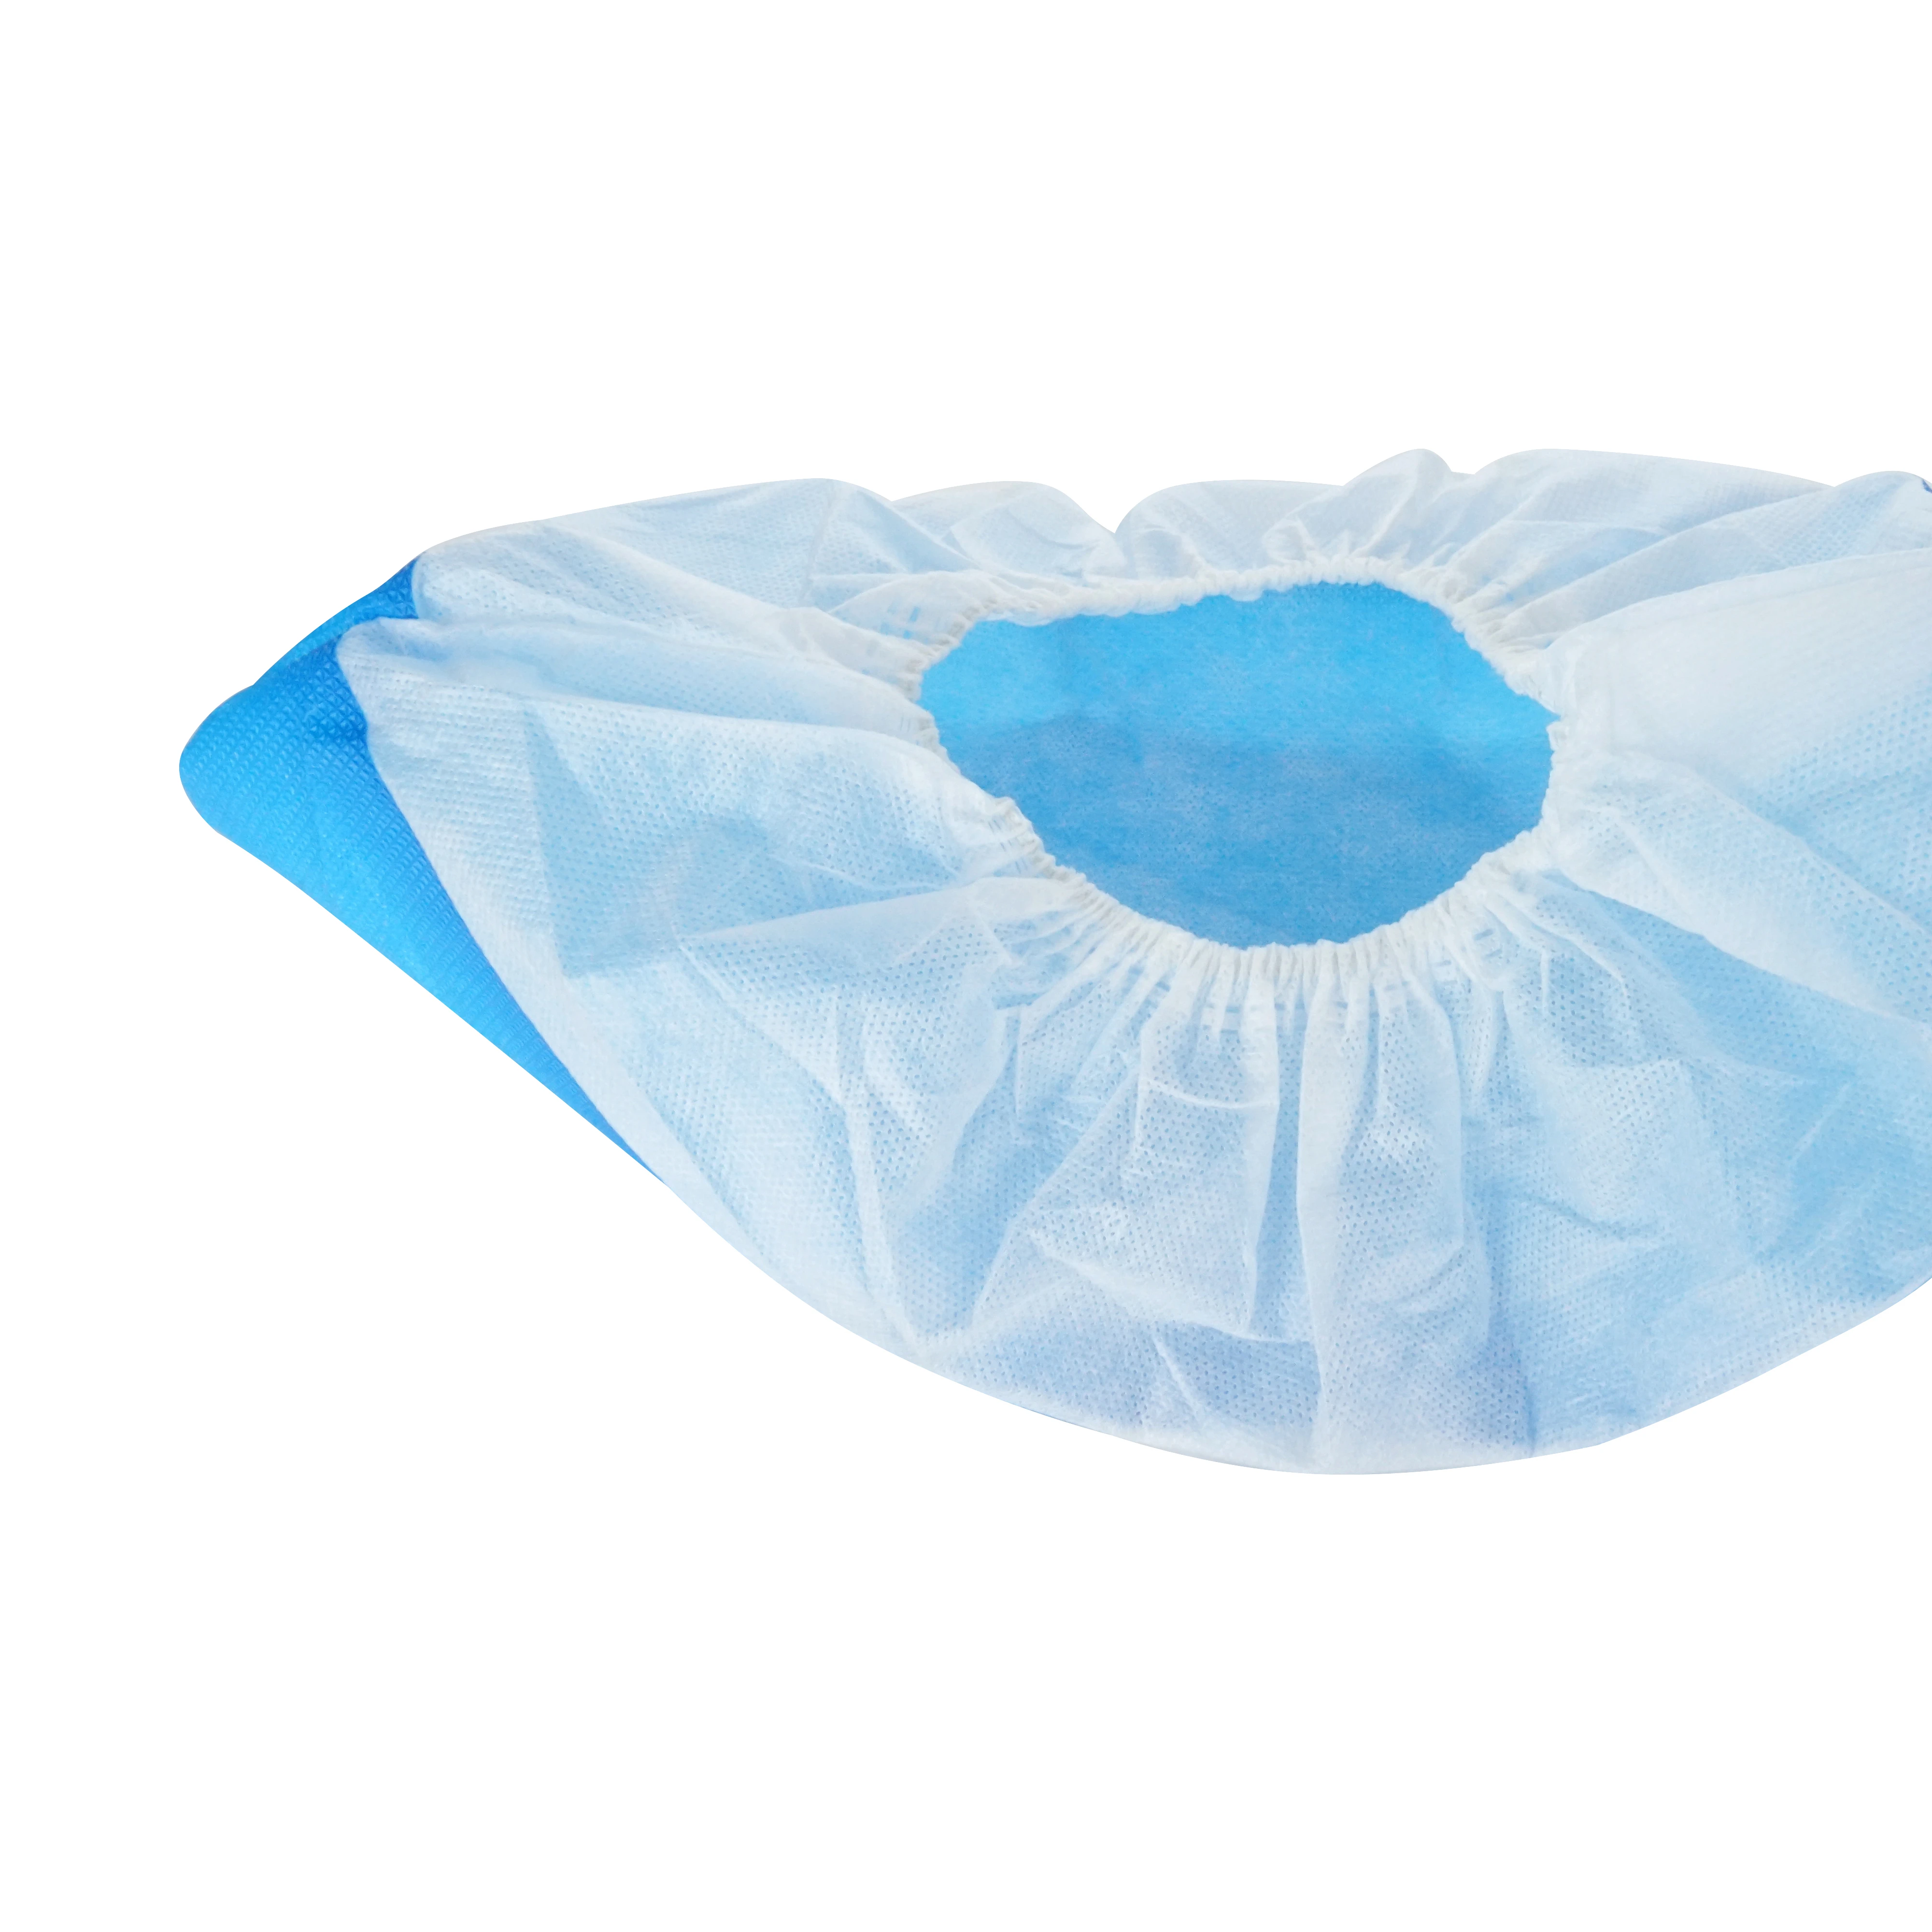 

Cpe+pp Shoe Cover Wholesale High Quality Blue Cpe Shoe Protection Cover Disposable